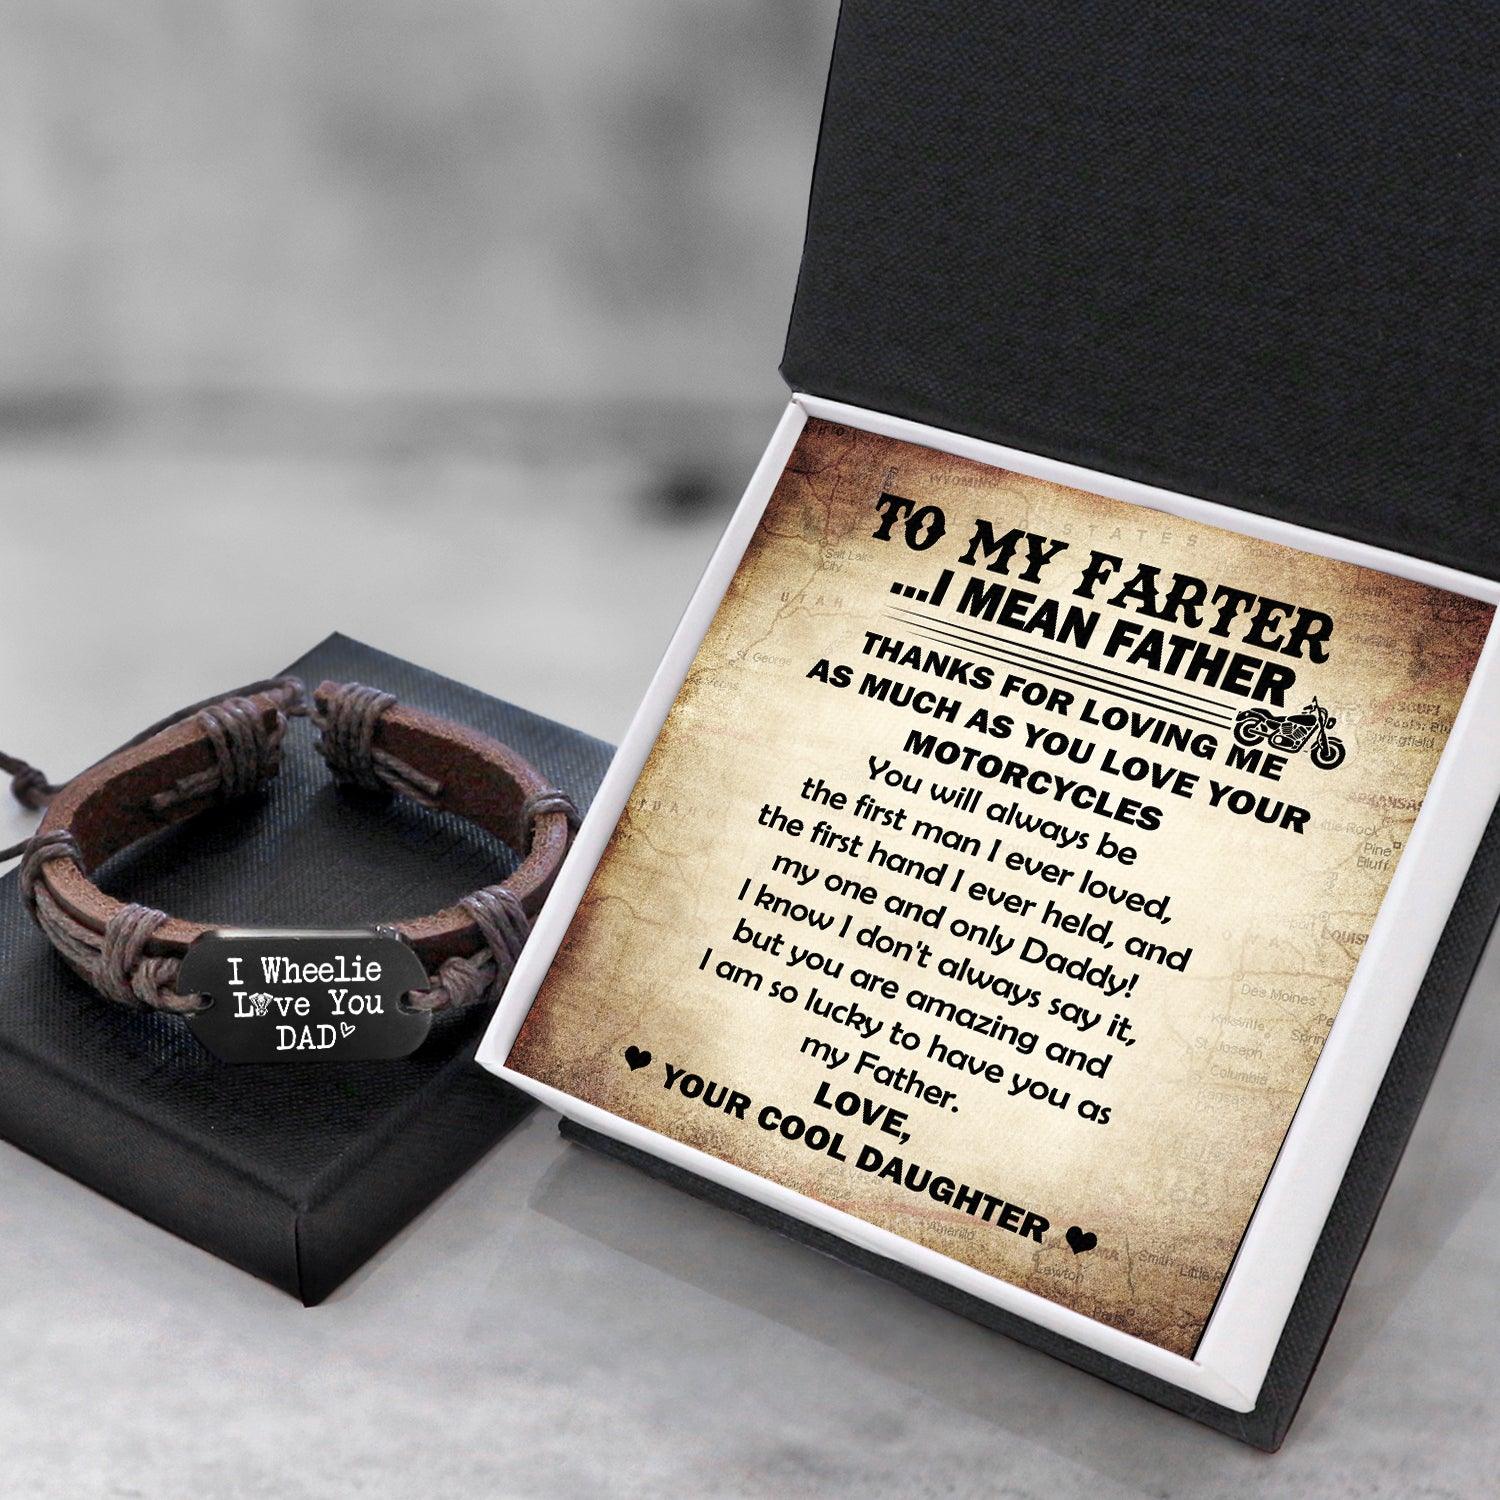 Leather Cord Bracelet - Biker - To My Father - From Daughter - I Am So Lucky To Have You As My Father - Augbr18003 - Gifts Holder